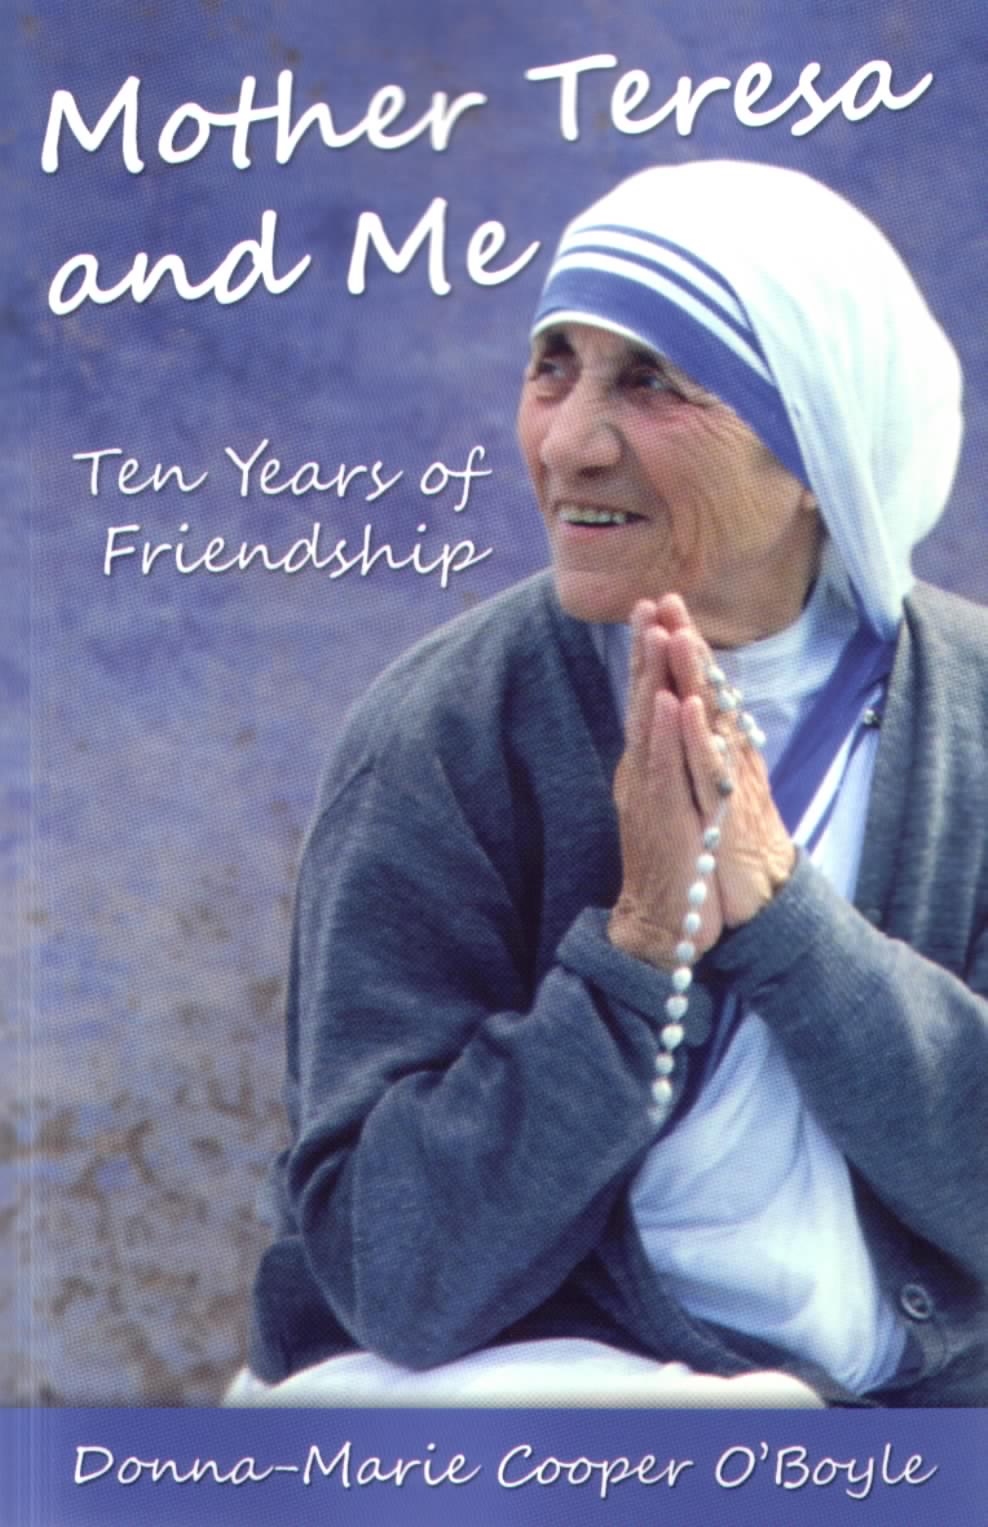 Donna-Marie O’Boyle discusses her book “Mother Teresa and Me” with BetterWorldians